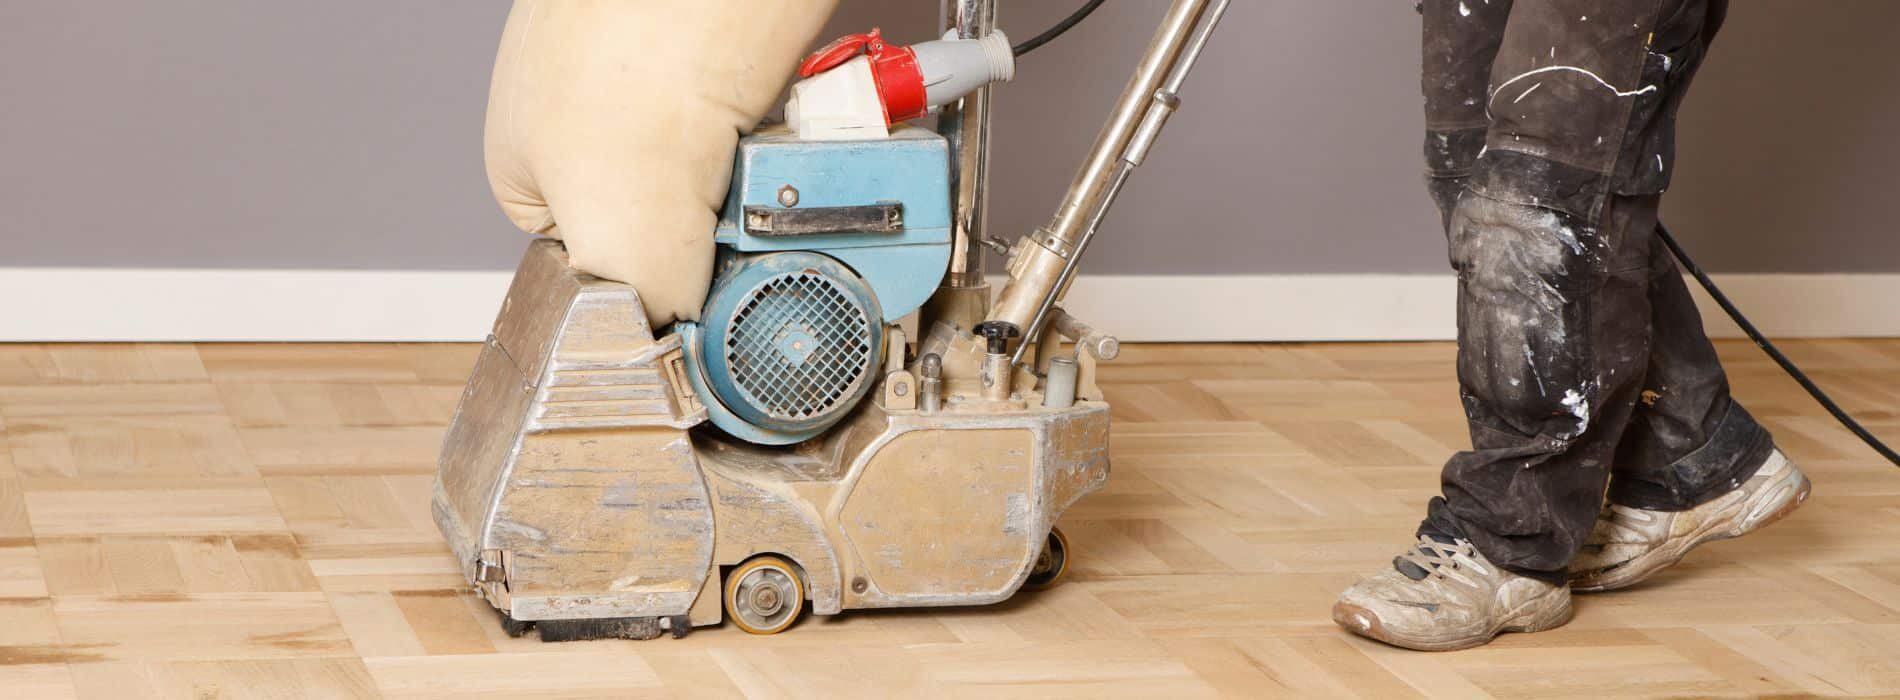 A powerful 2.2 kW Bona Belt sander used by Mr Sander® for efficient parquet floor restoration in Hornchurch, RM12. The sander is equipped with an integrated HEPA-filtered dust extraction system, ensuring minimal airborne dust and a perfectly clean finish.